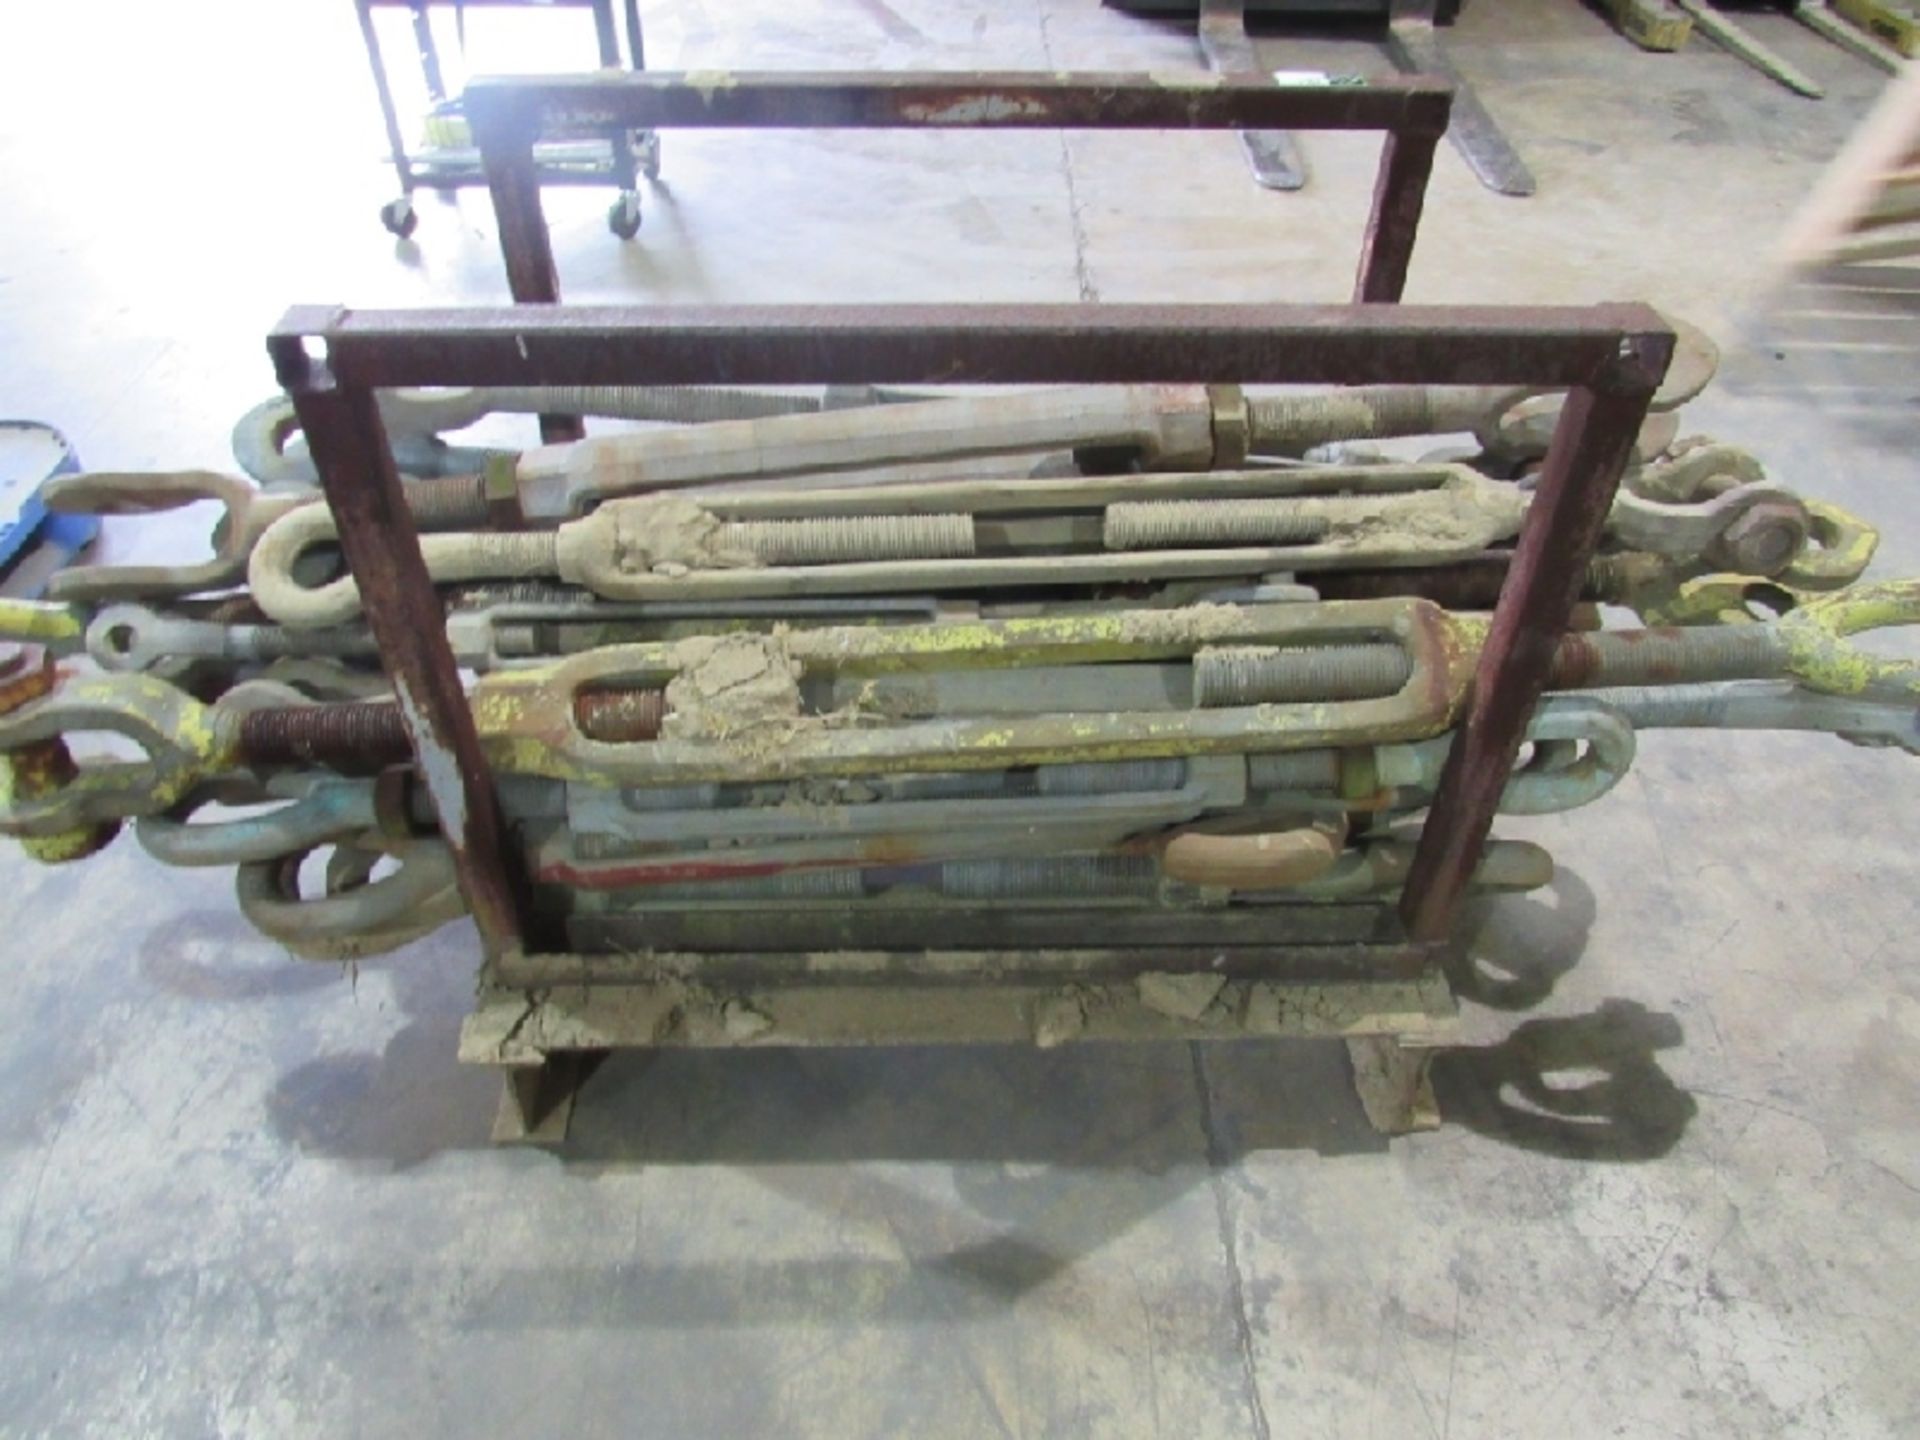 (approx qty - 20) Turnbuckles and Rack- ***Located in Chattanooga, TN*** MFR - Unknown Sizes Range - Bild 4 aus 8